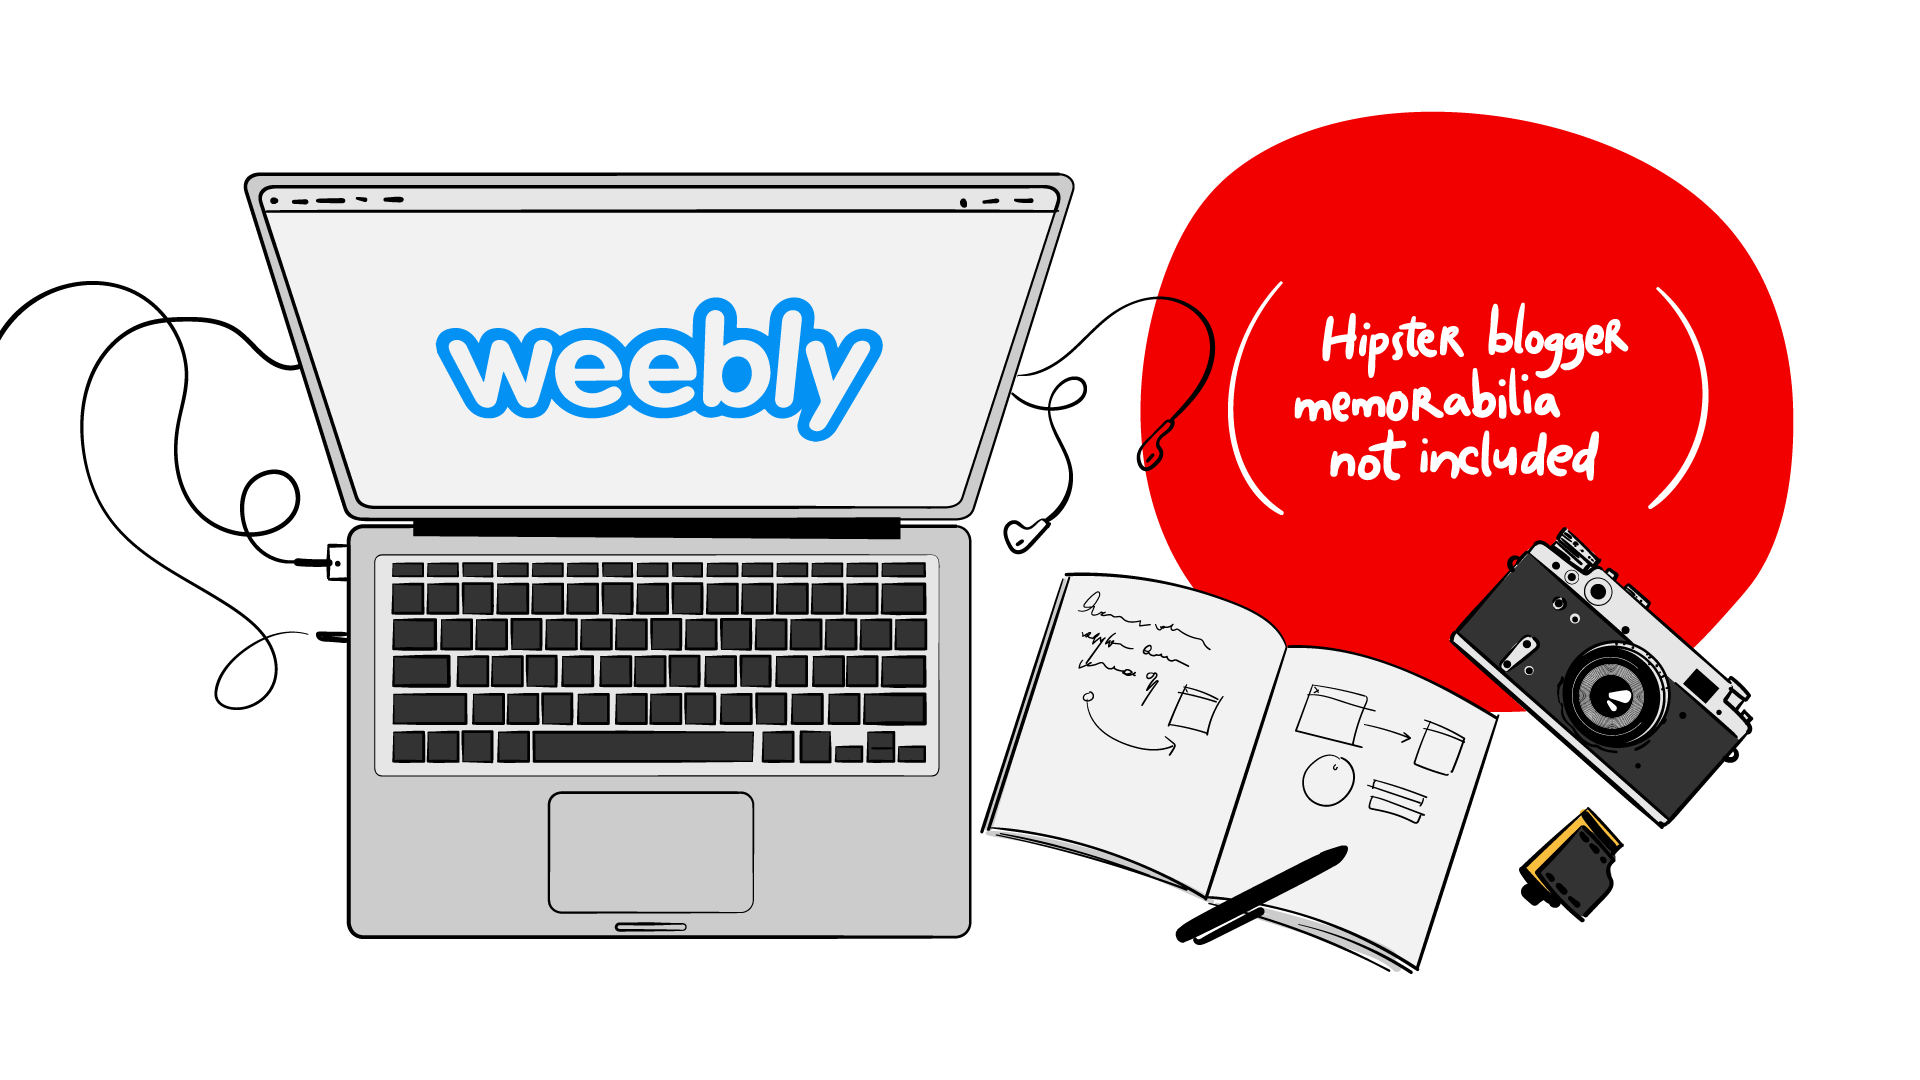 Can you use a Google domain with Weebly?
